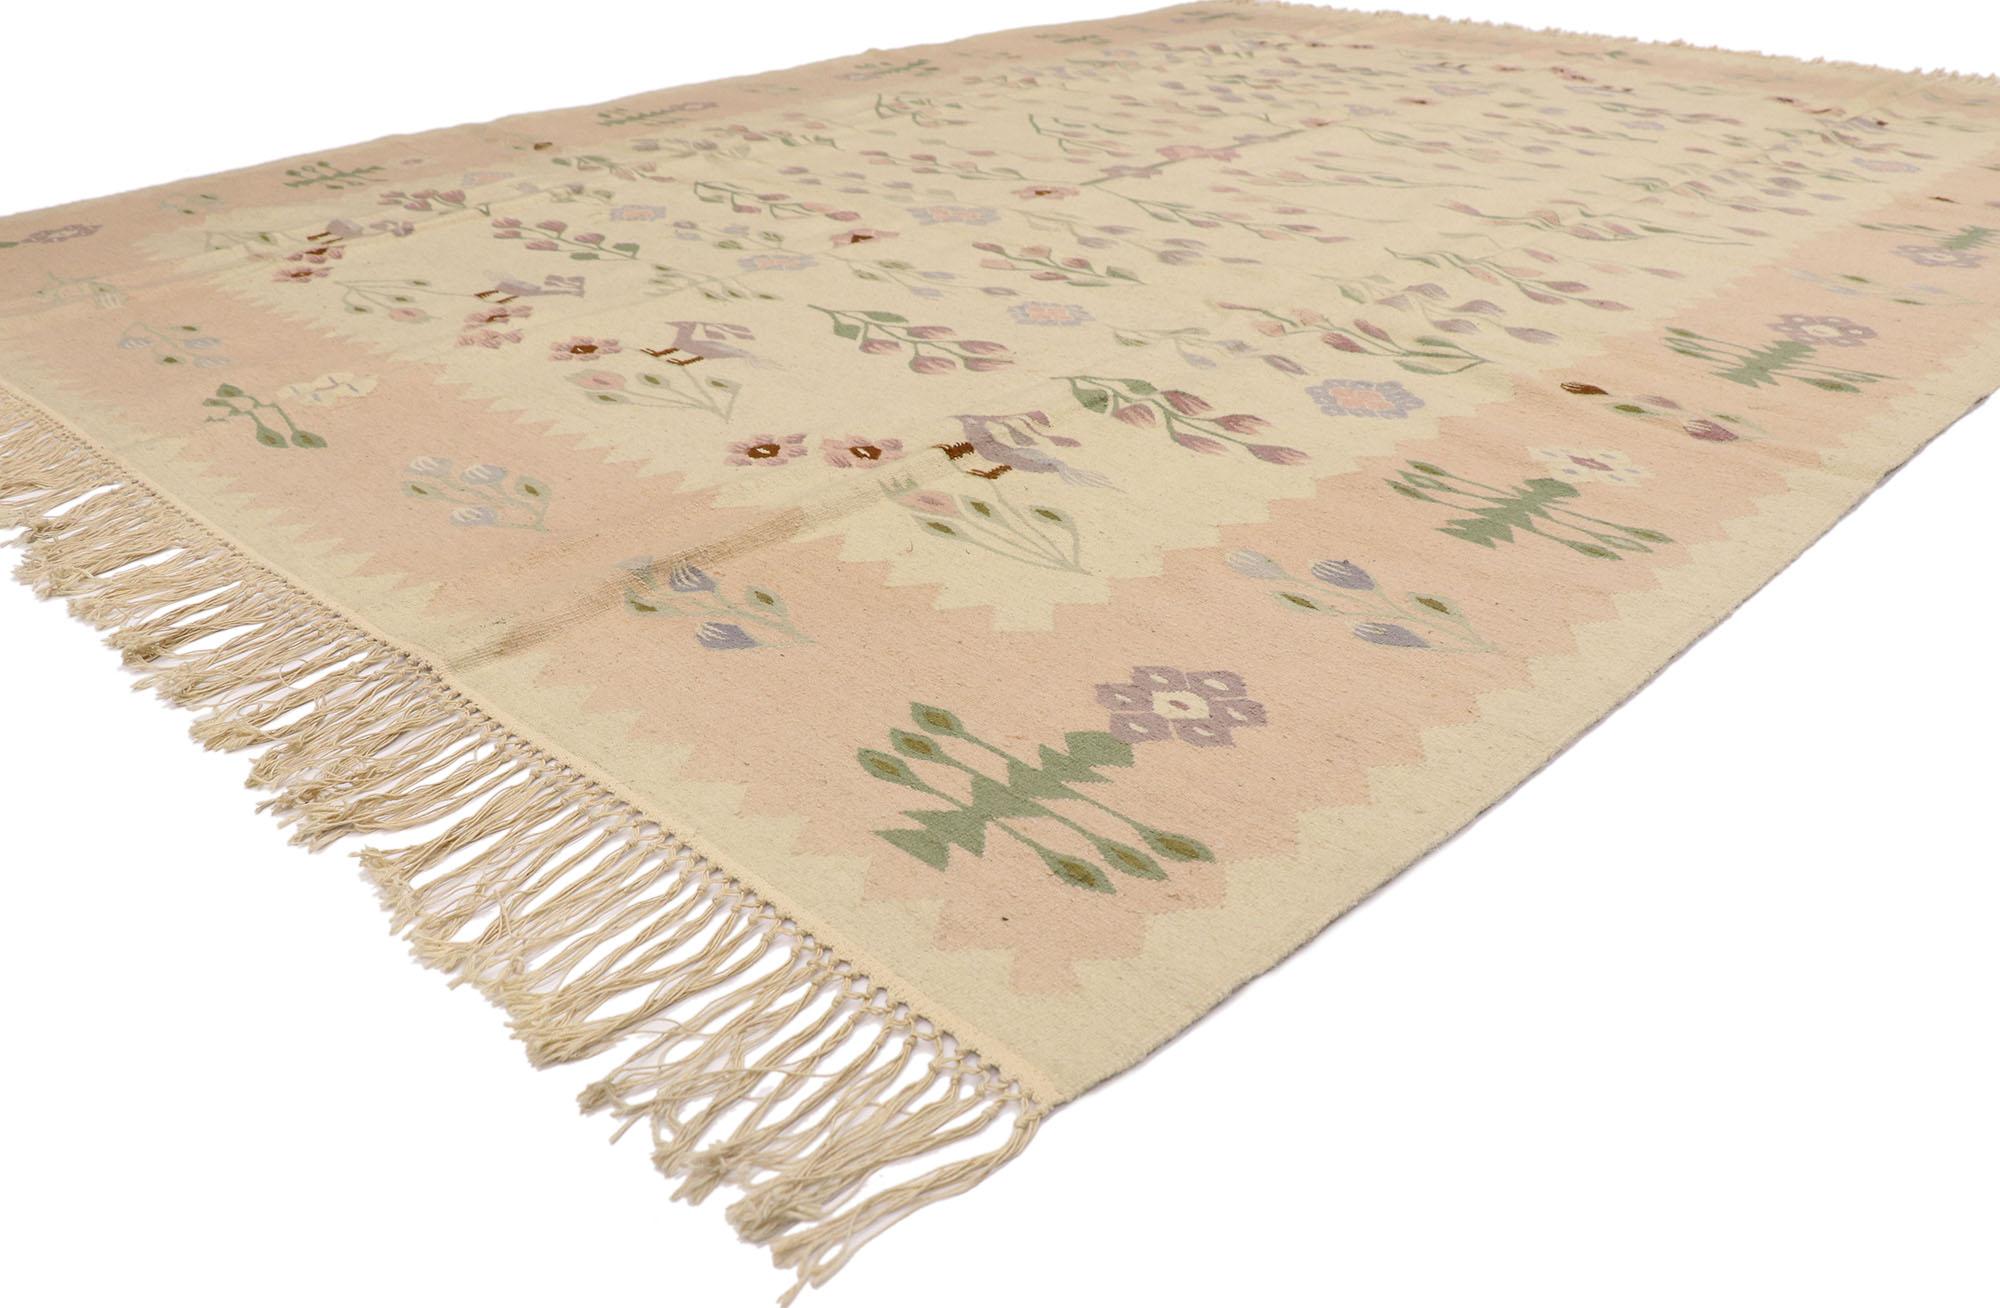 77965 Vintage Romanian Floral Kilim rug with French Cottage Style 08'08 x 11'10. Full of tiny details and a delicate floral pattern combined with French Cottage style, this hand-woven wool vintage Romanian kilim rug is a captivating vision of woven